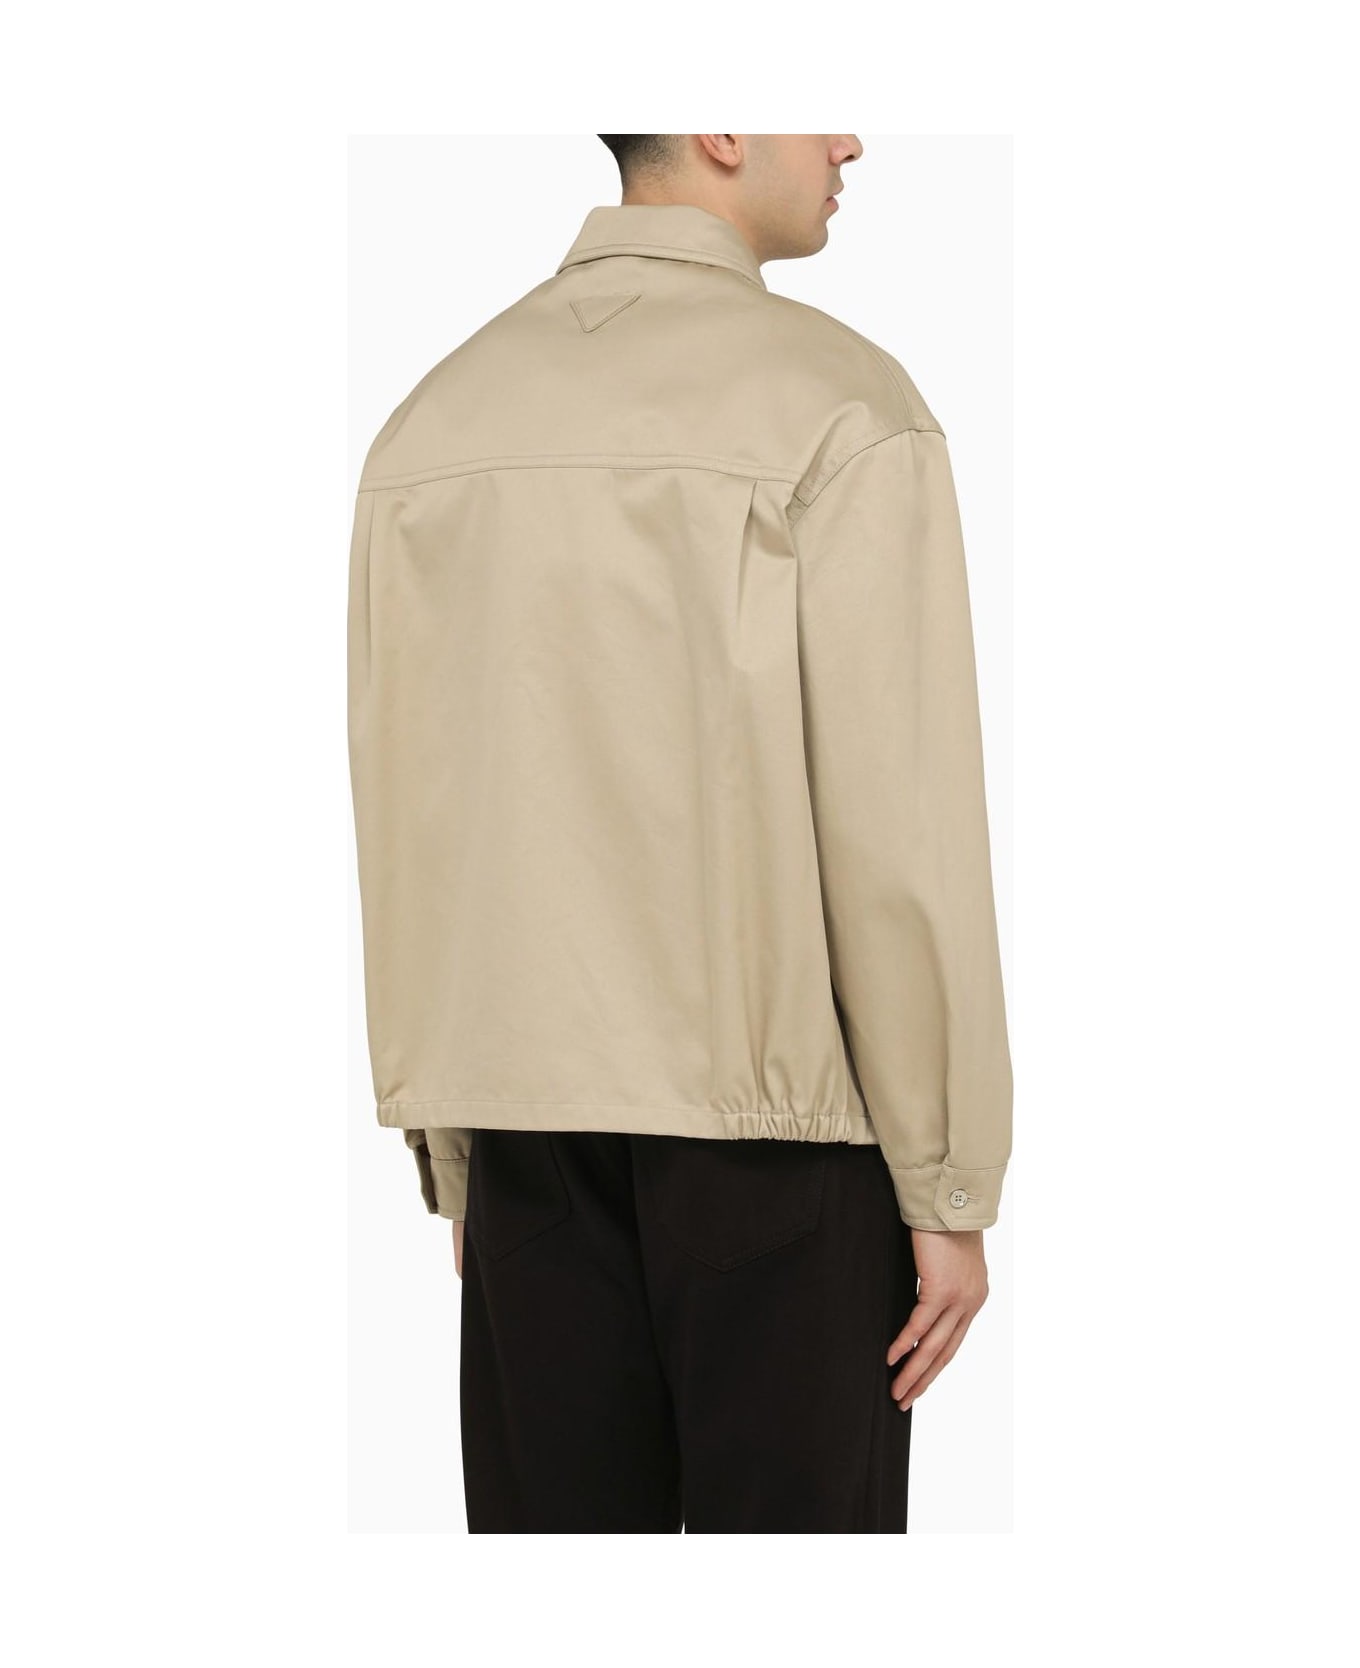 Prada Lightweight Cotton Jacket In Rope Colour - NATURAL